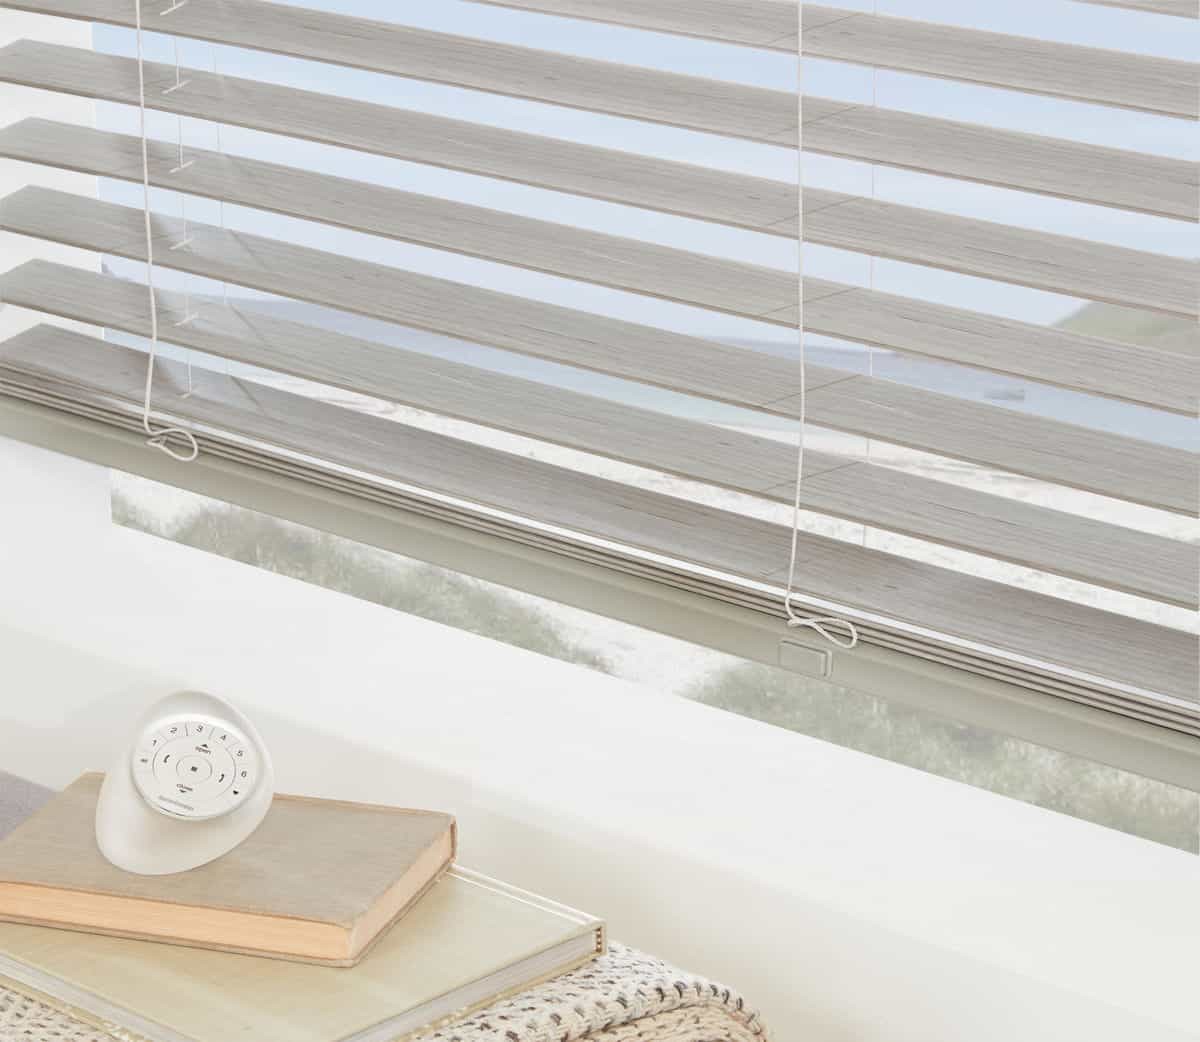 Hunter Douglas PowerView® Automation Motorized Blinds Electric Blinds Smart Shades near Wilmington, North Carolina (NC)